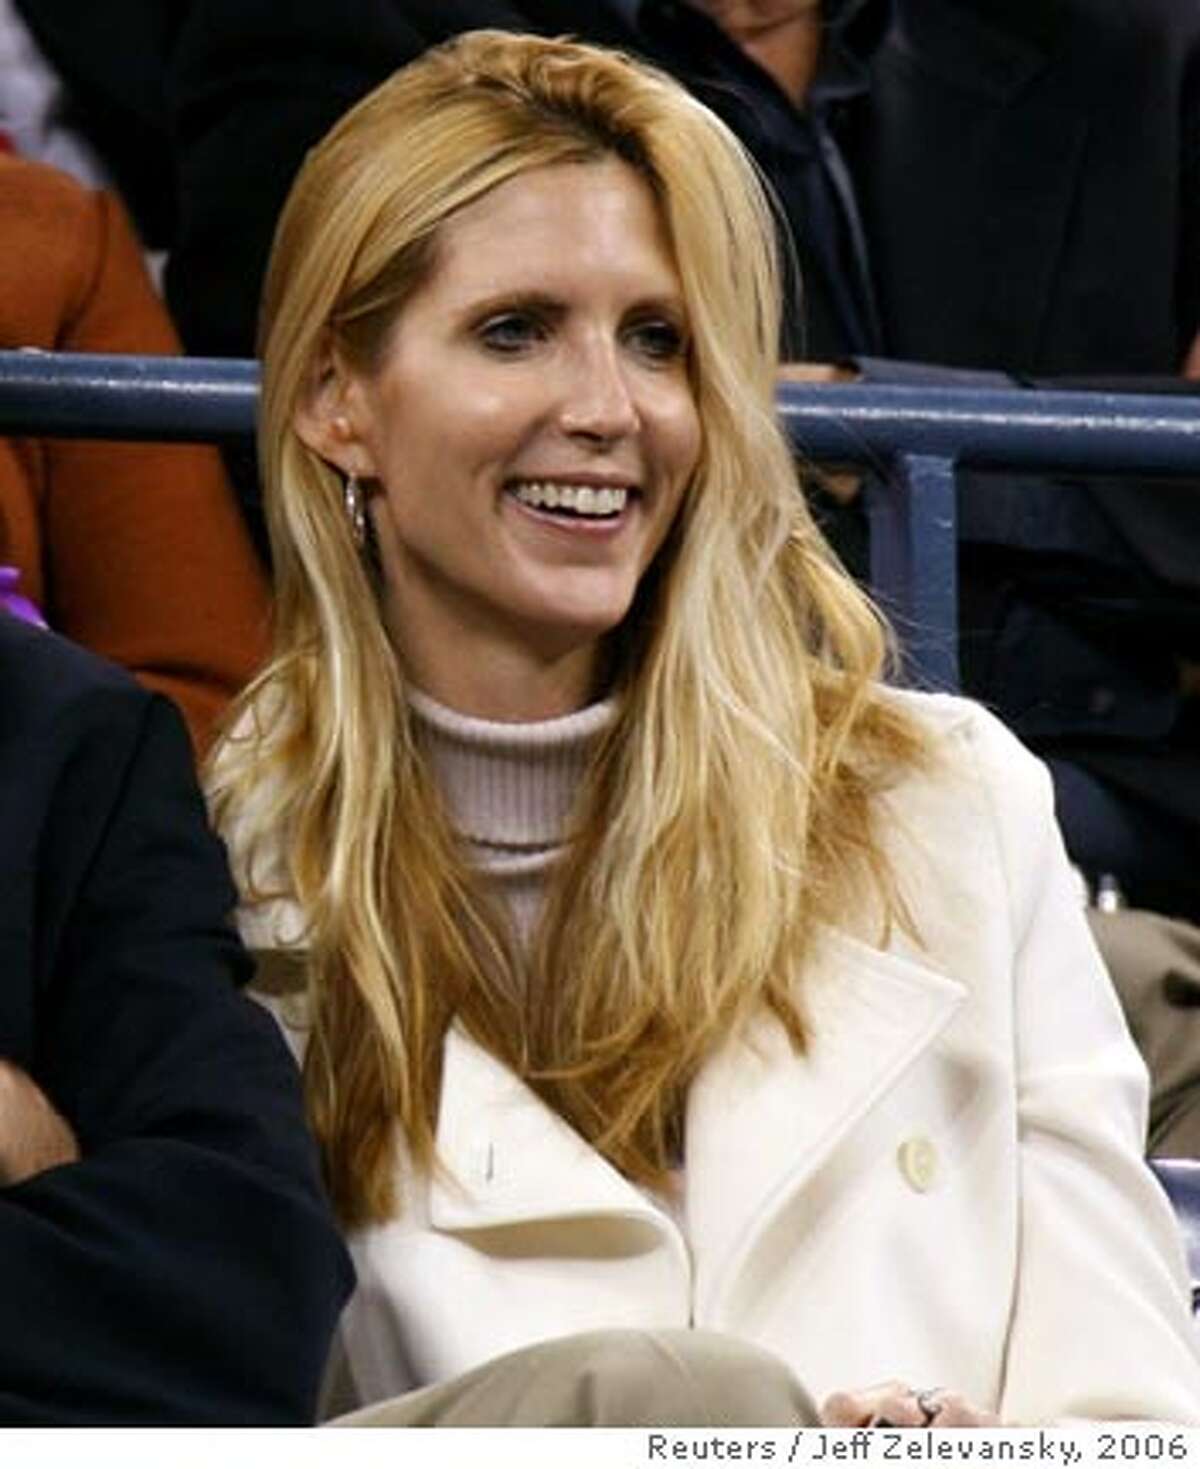 Conservative commentator Ann Coulter watches play at the U.S. Open tennis tournament in New York September 4, 2006. REUTERS/Jeff Zelevansky (UNITED STATES) Ran on: 09-17-2006 Commentator Ann Coulter: A fan of Joe McCarthy. Ran on: 11-02-2006 Ann Coulter is accused of voting in the wrong precinct in West Palm Beach, Fla., in February.